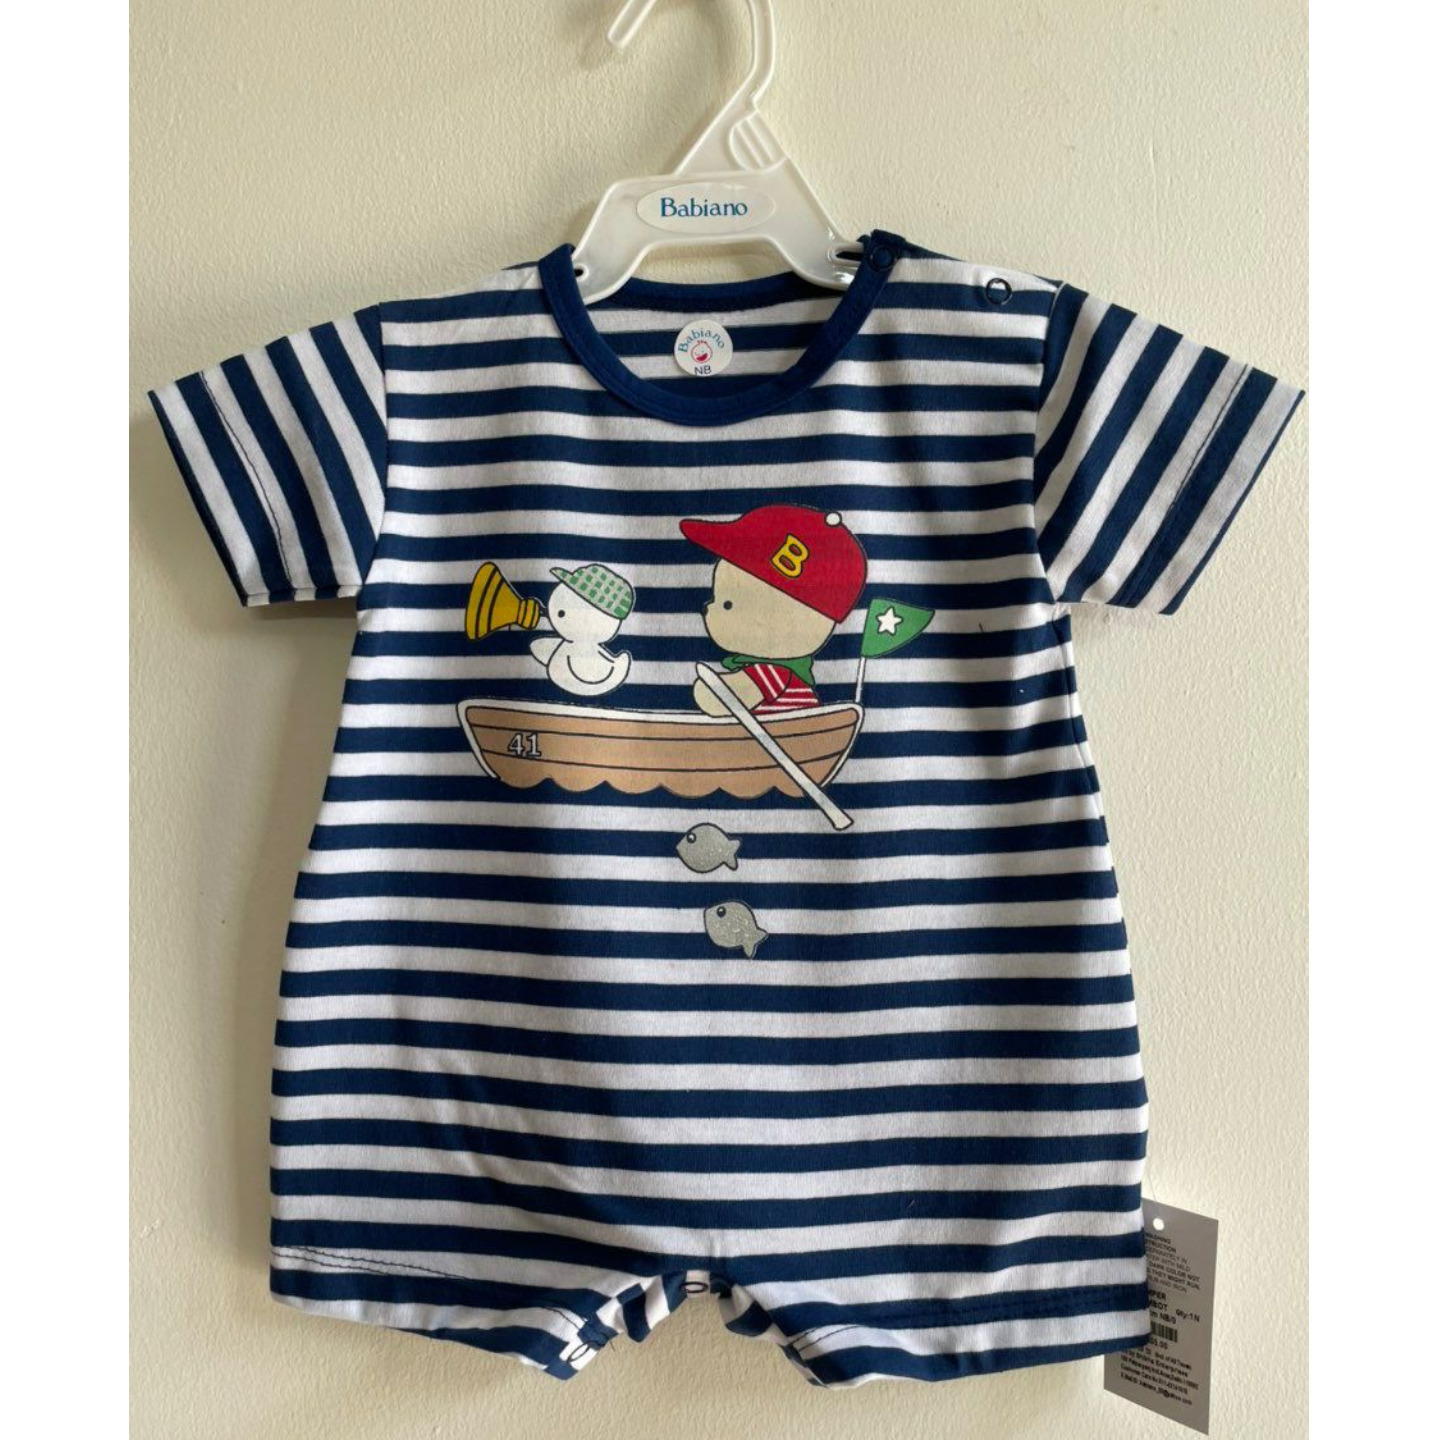 Babiano Boat Romper Rs 395 Only Made In India NB to 1 Year size